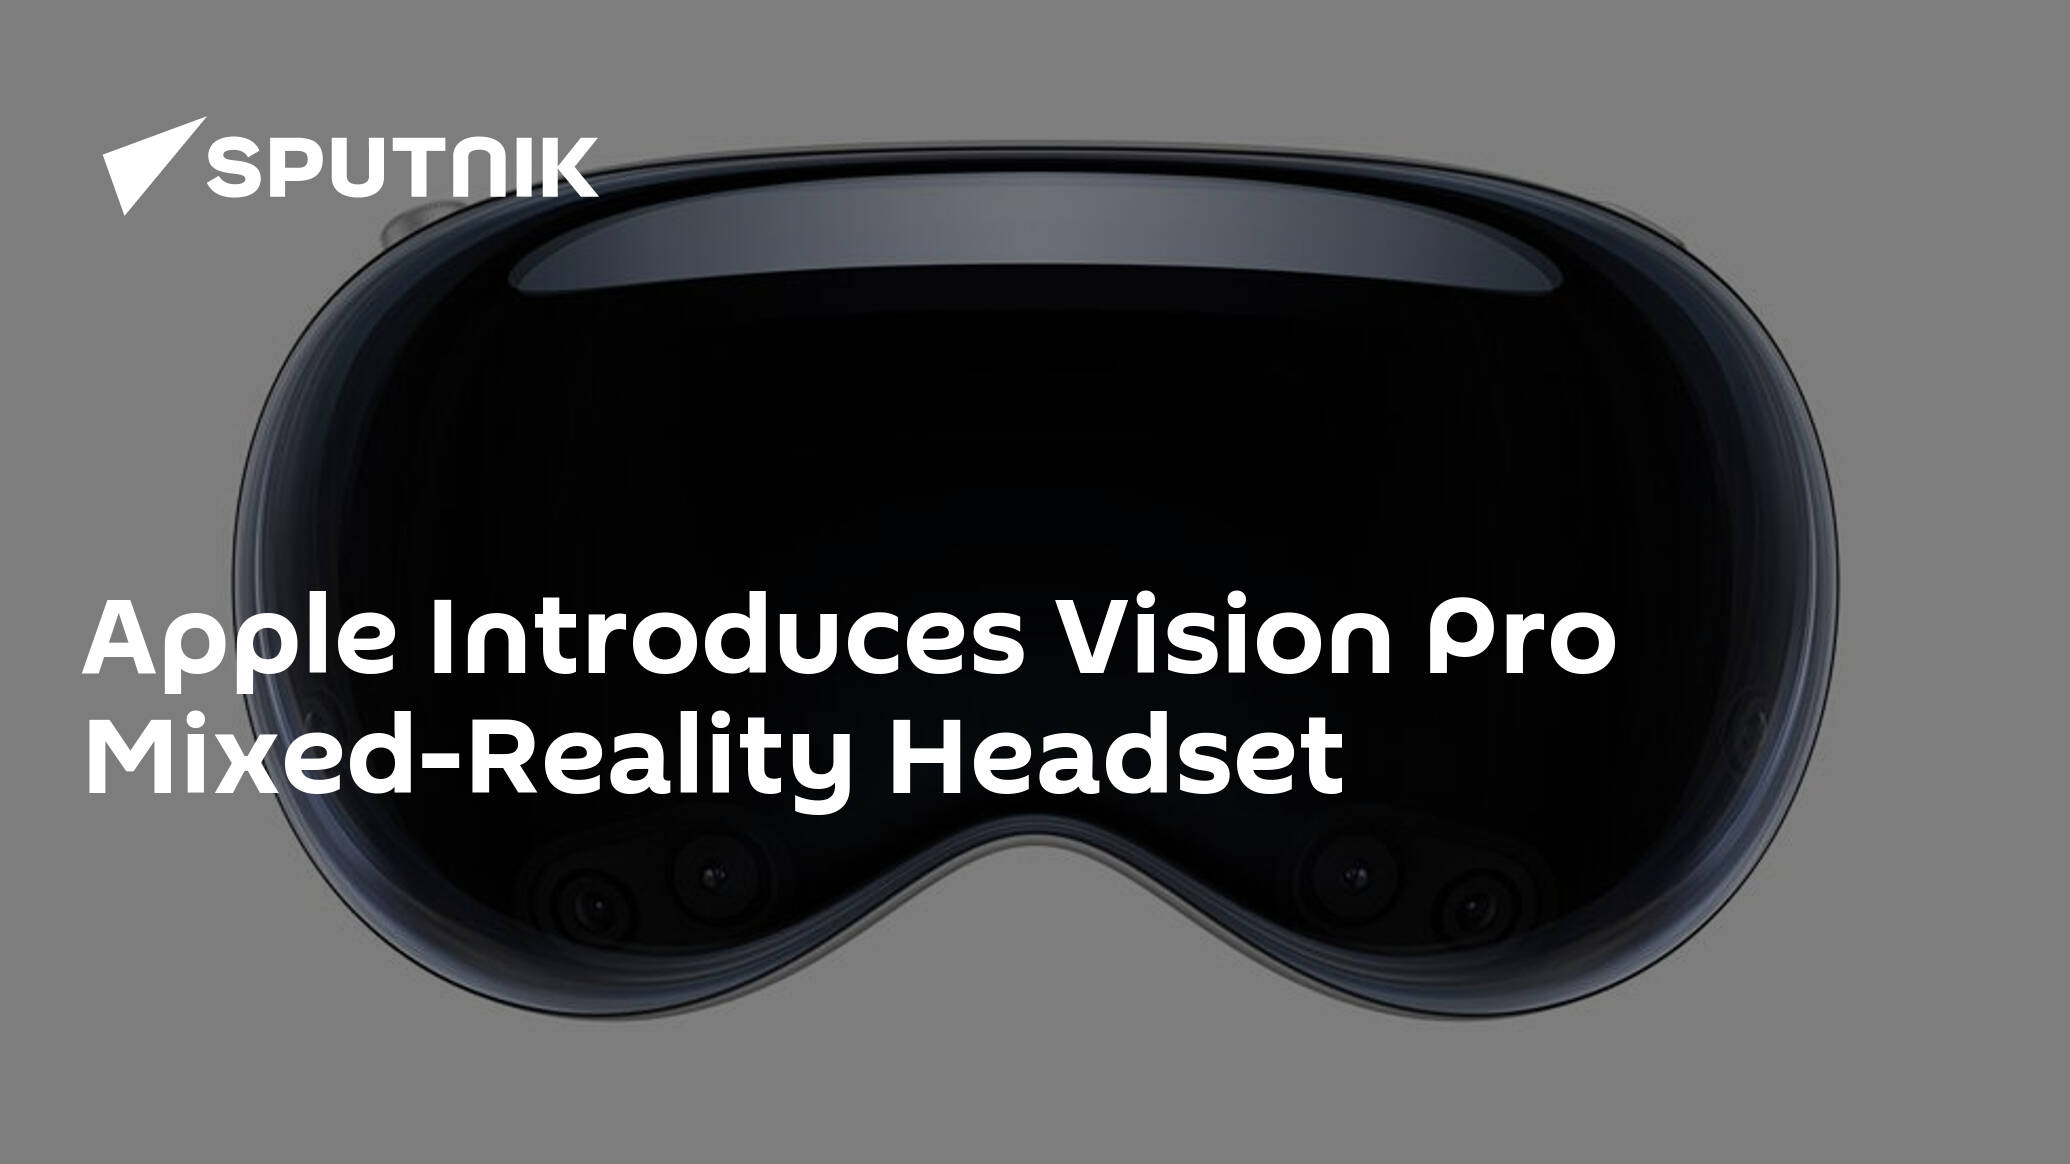 Apple Introduces Vision Pro Mixed-Reality Headset